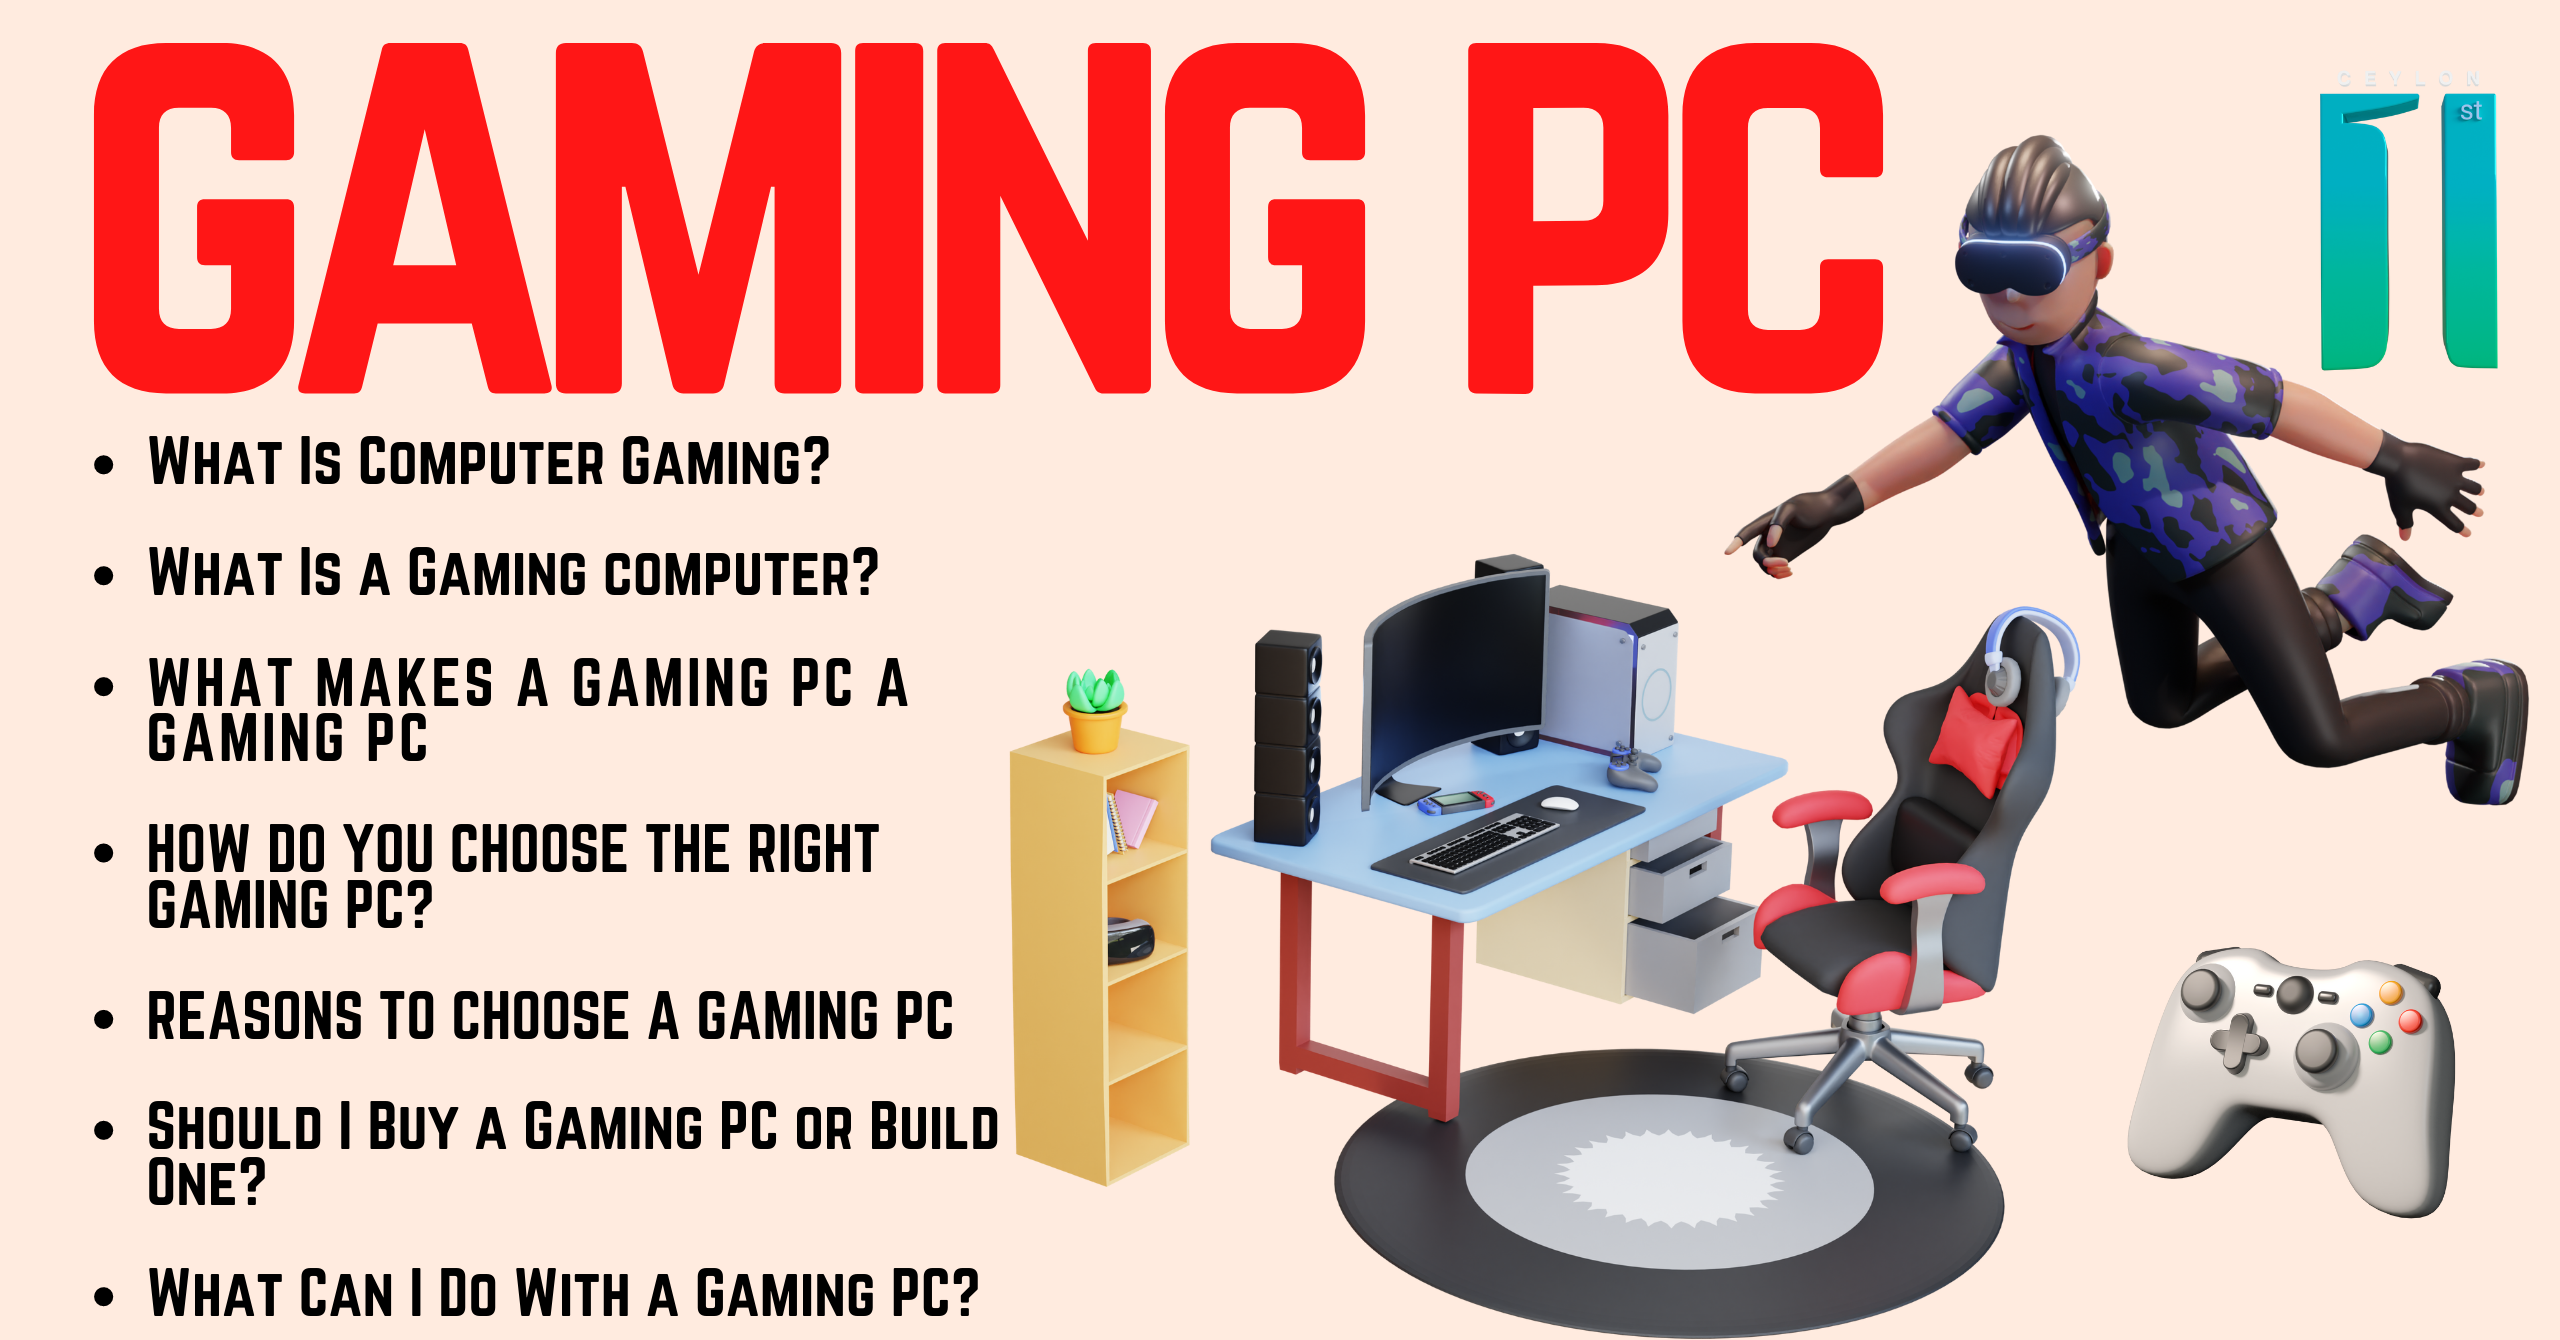 How do I choose the right gaming PC?